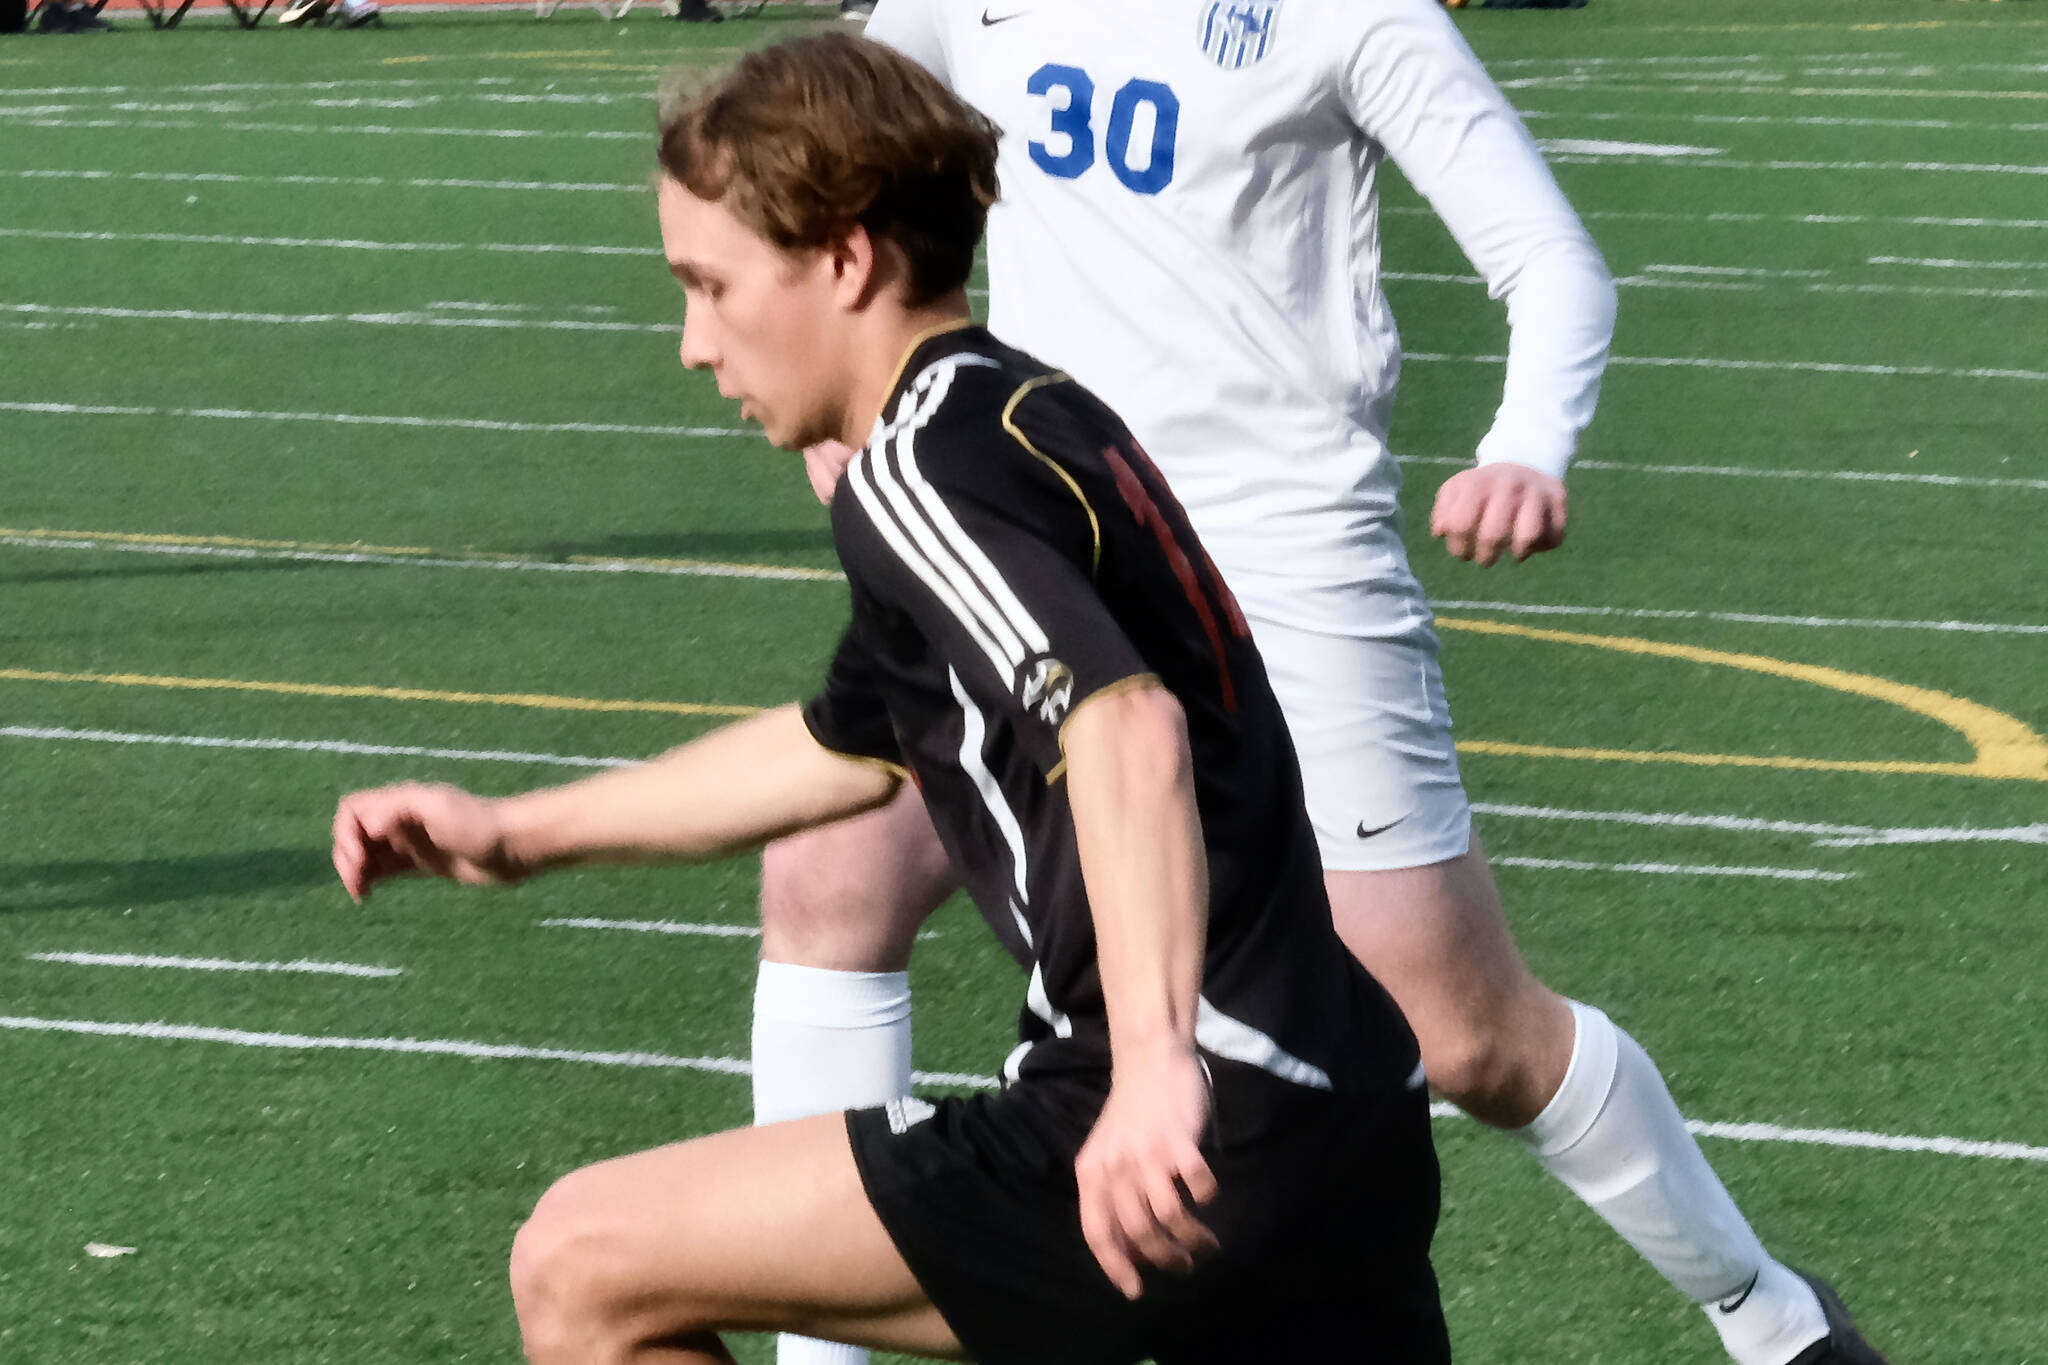 Juneau-Douglas High School: Yadaa.at Kalé sophomore Kai Ciambor, shown in earlier season action, had two goals and controlled the pitch for the Crimson Bears during their final two regular season games at Ketchikan last weekend. (Klas Stolpe / Juneau Empire)